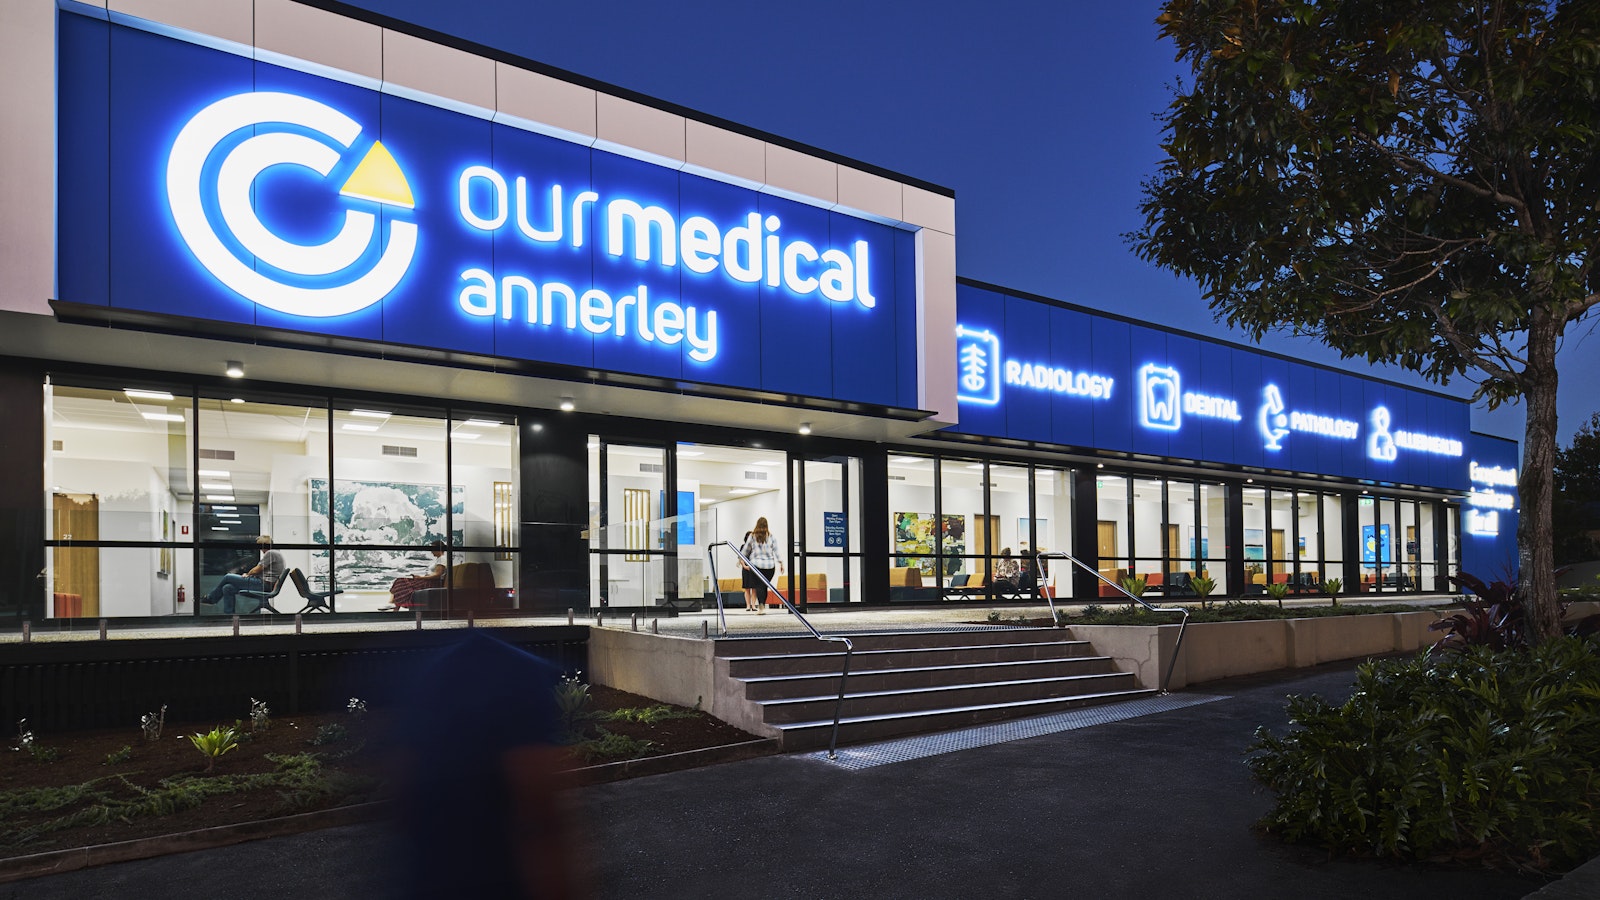 Our Medical Annerley_Exterior